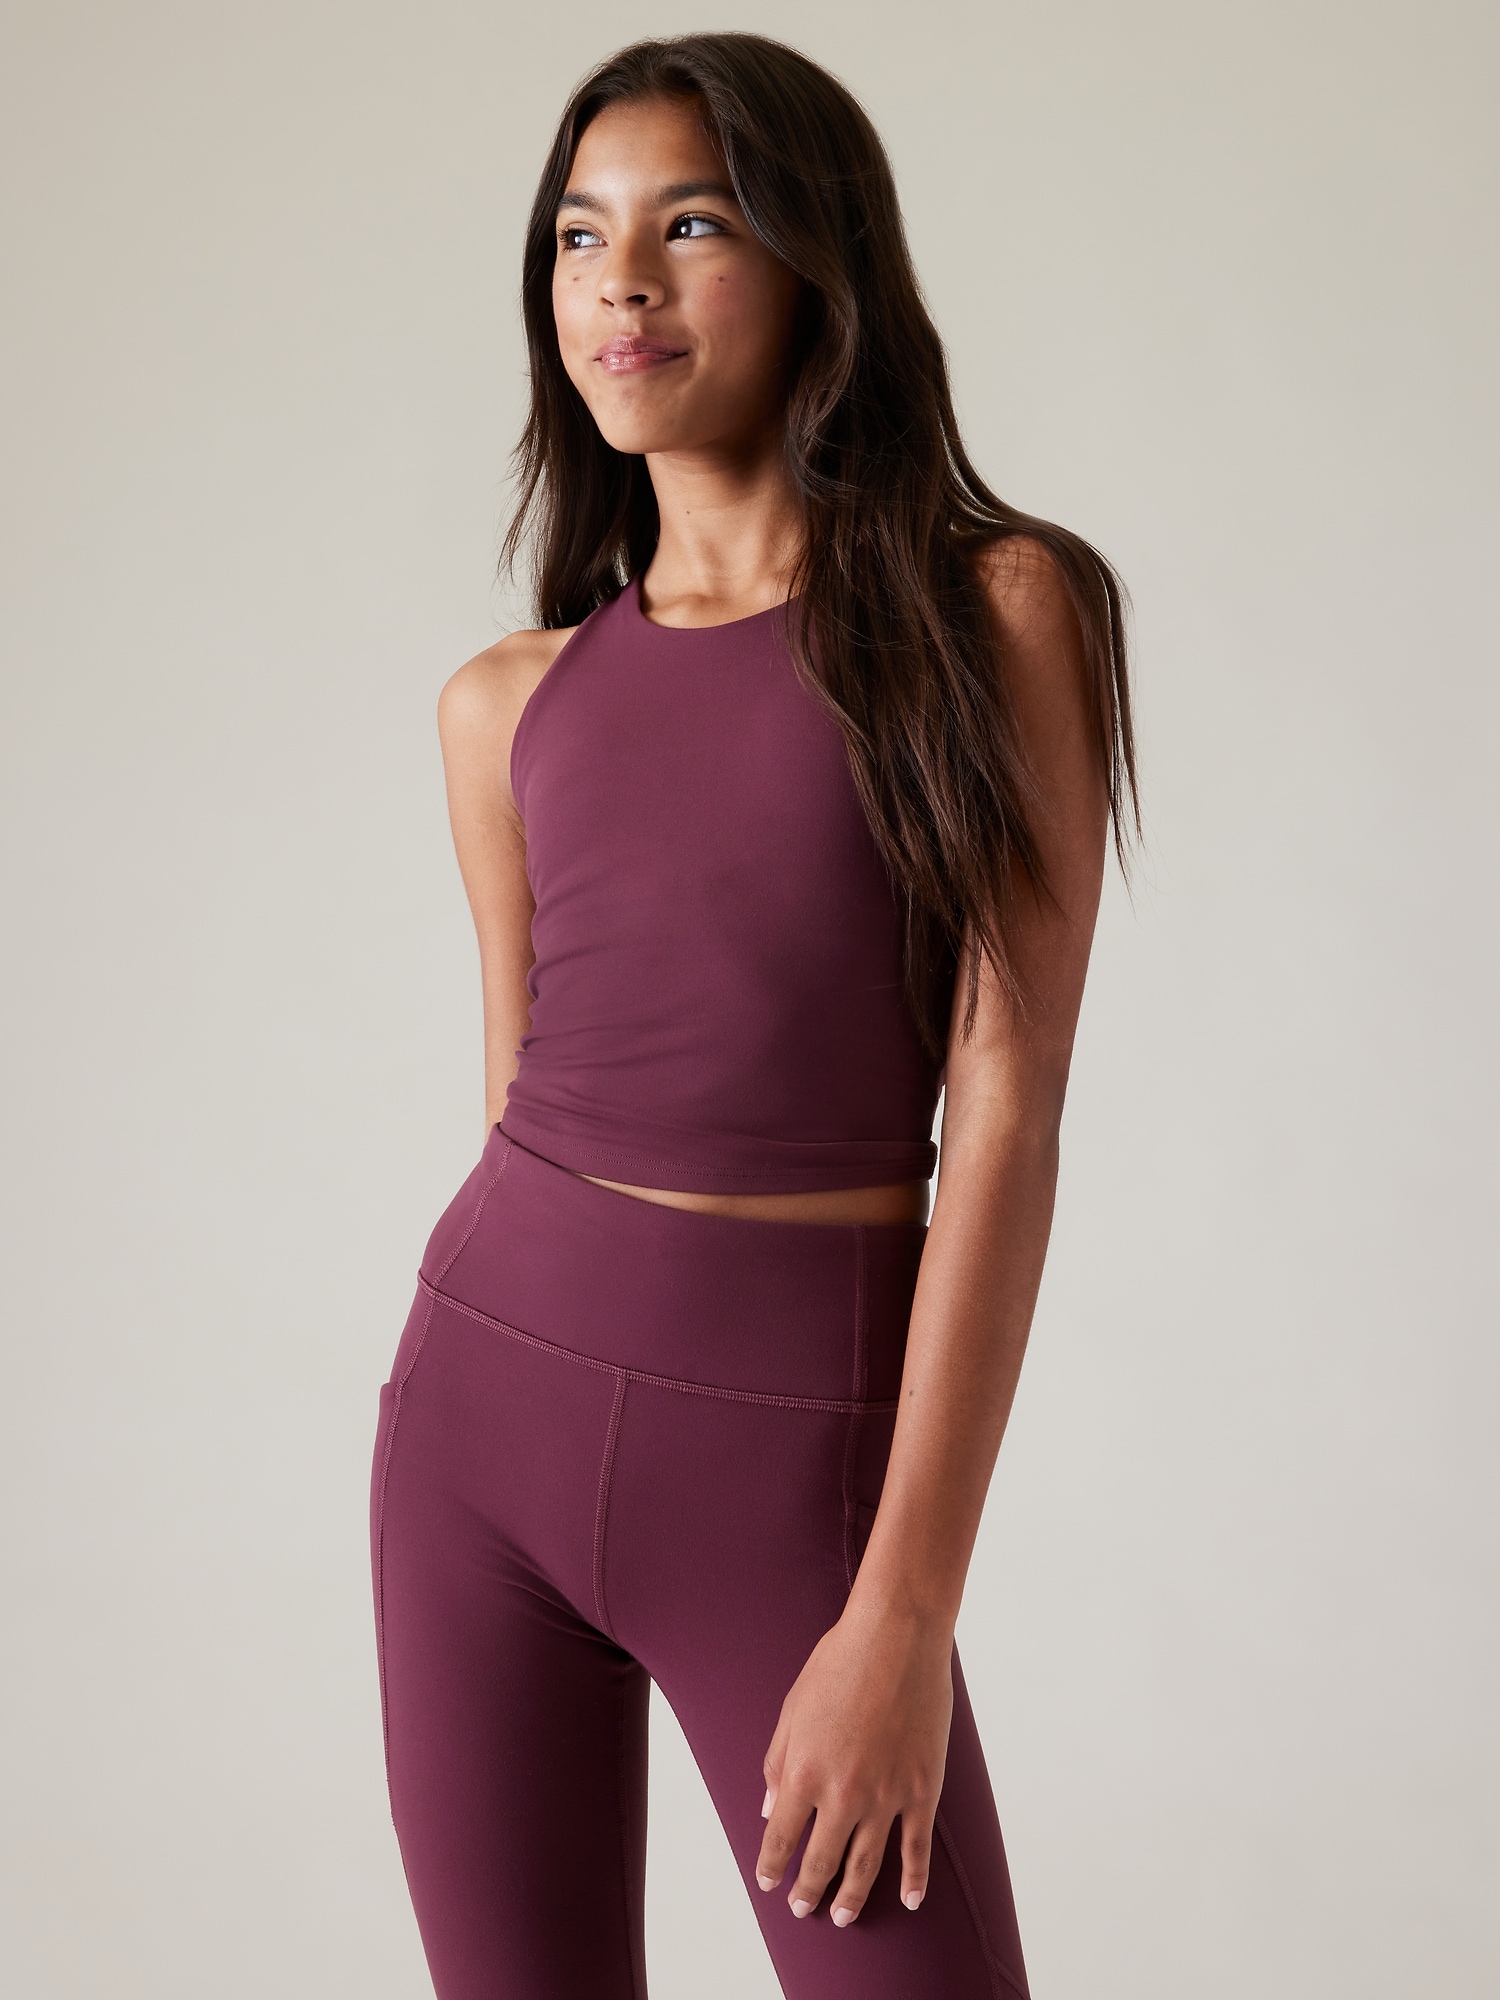 This Lululemon Align Tank Dupe Is So Good & It's Just $22